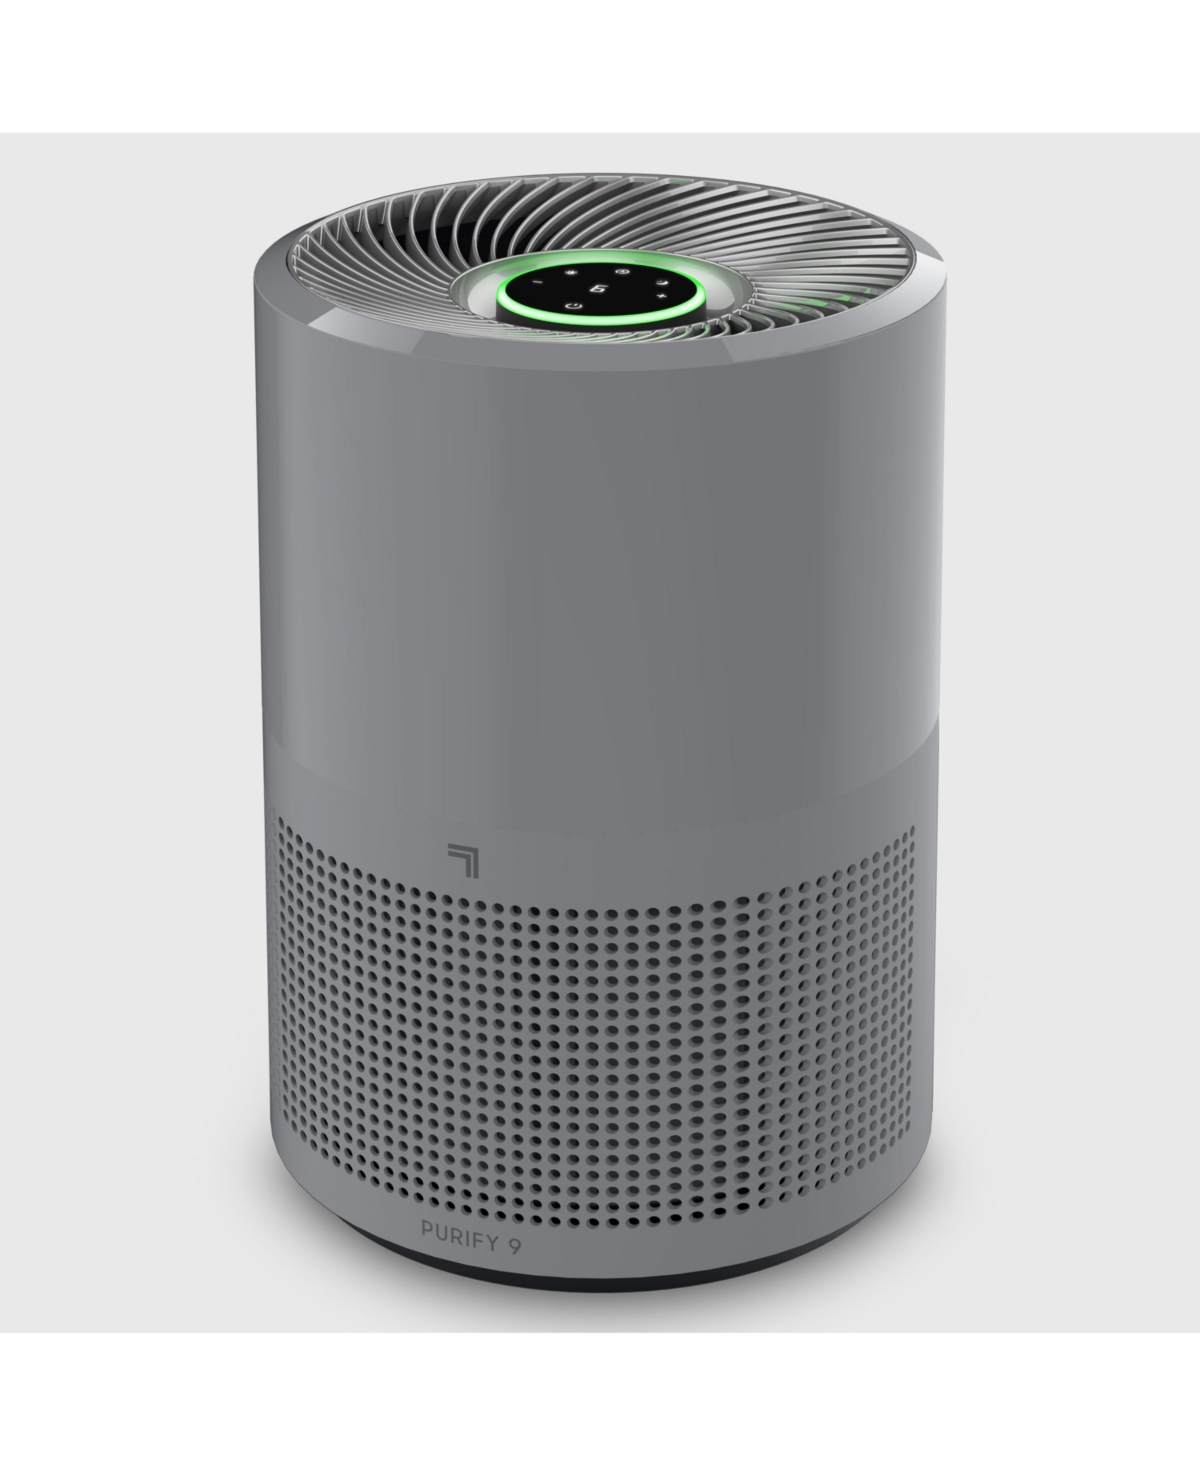 Sharper Image Purify 9 Whole Room Air Cleaner With True Hepa Filtration, Activated Carbon Filter, Visual Air Quali In Green